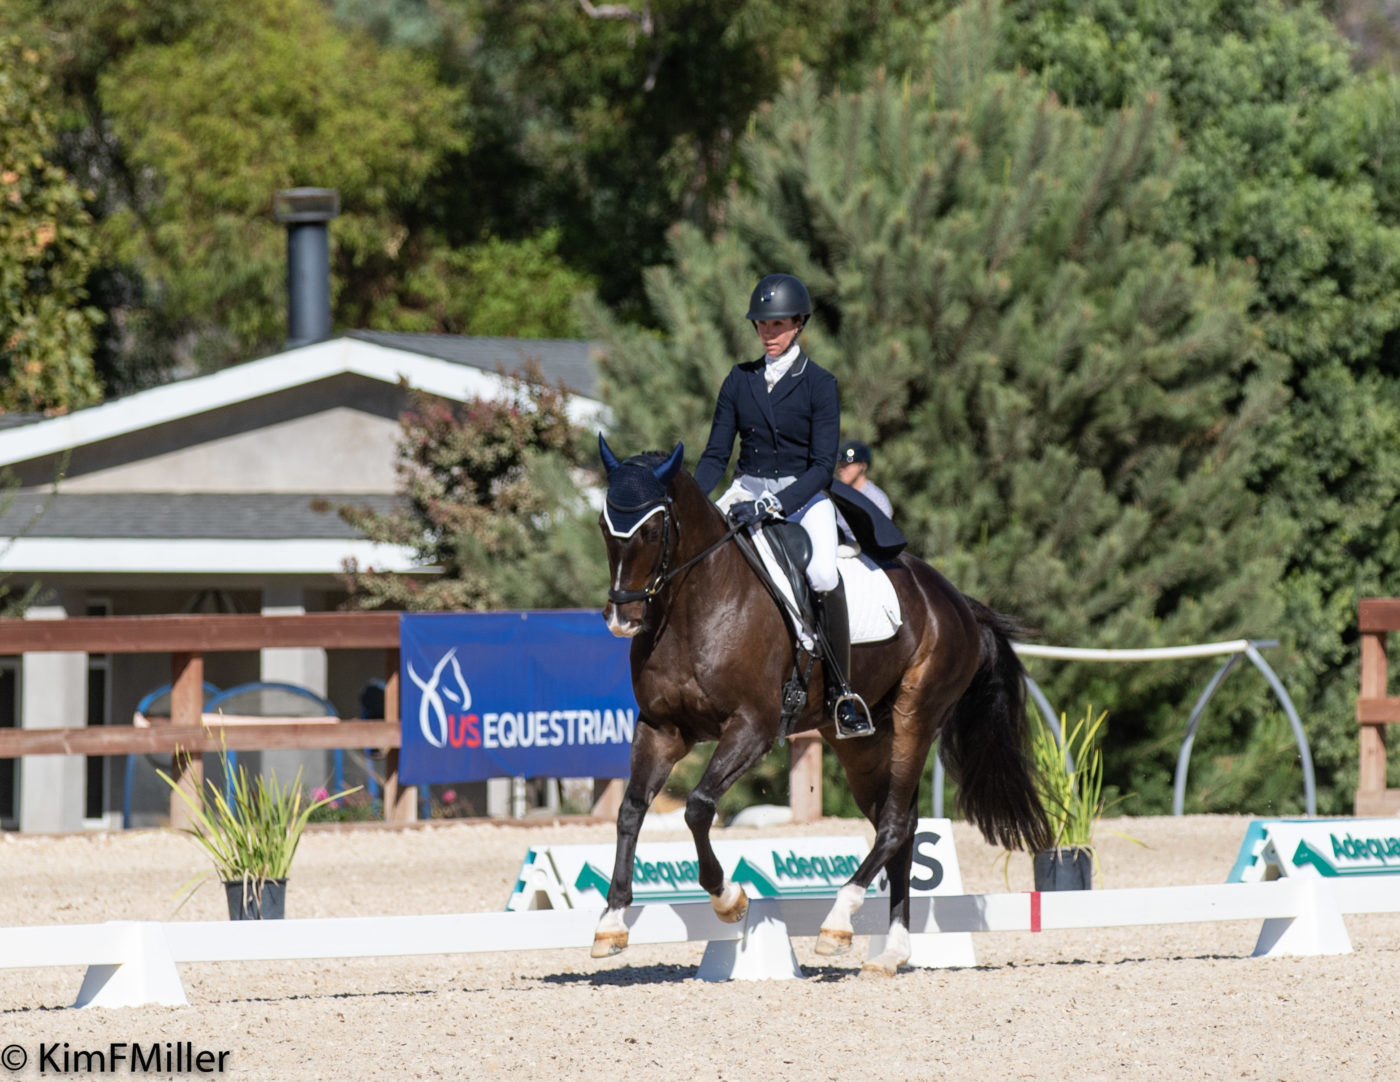 CCI3*-L - 2nd - Asia Vedder and Isi - 29.9